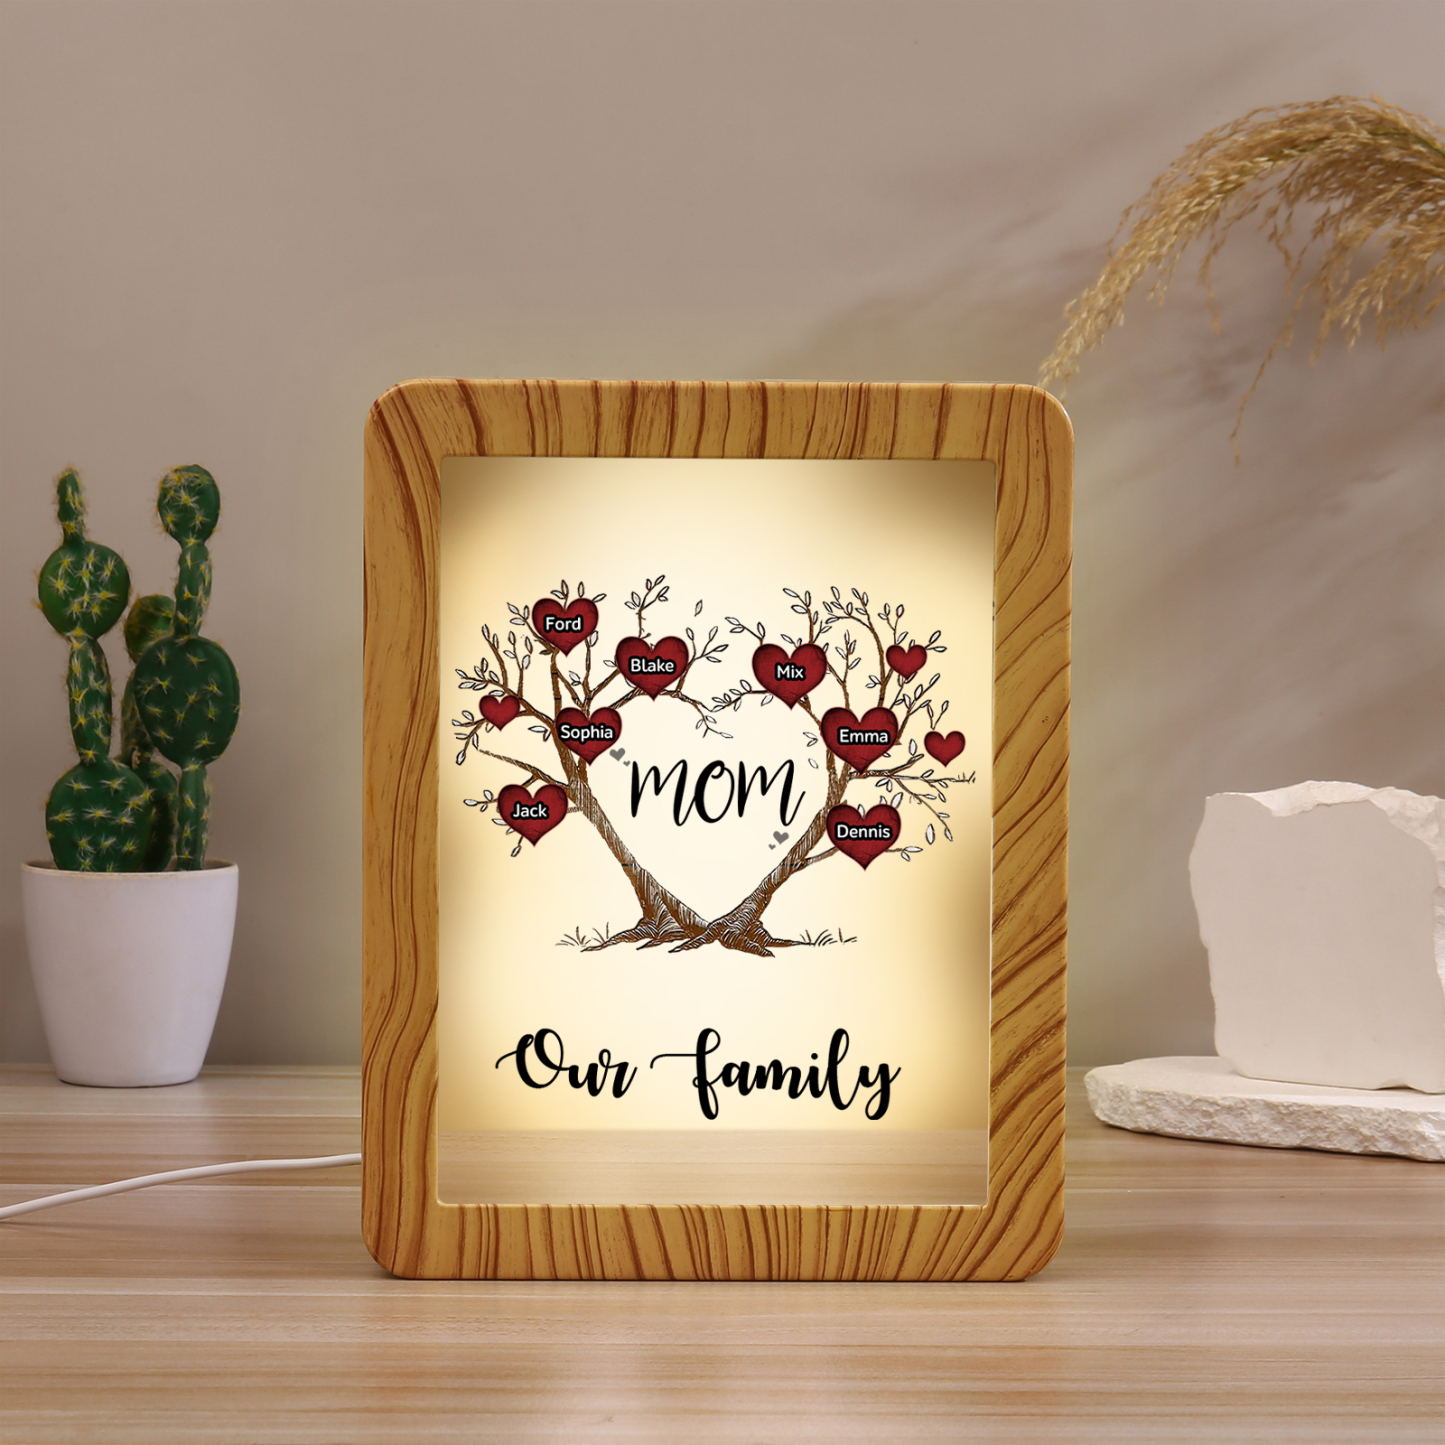 7 Names - Personalized Home Mirror Photo Frame Night Light Insert/Rechargeable Custom Text LED Night Light Gift for Mom